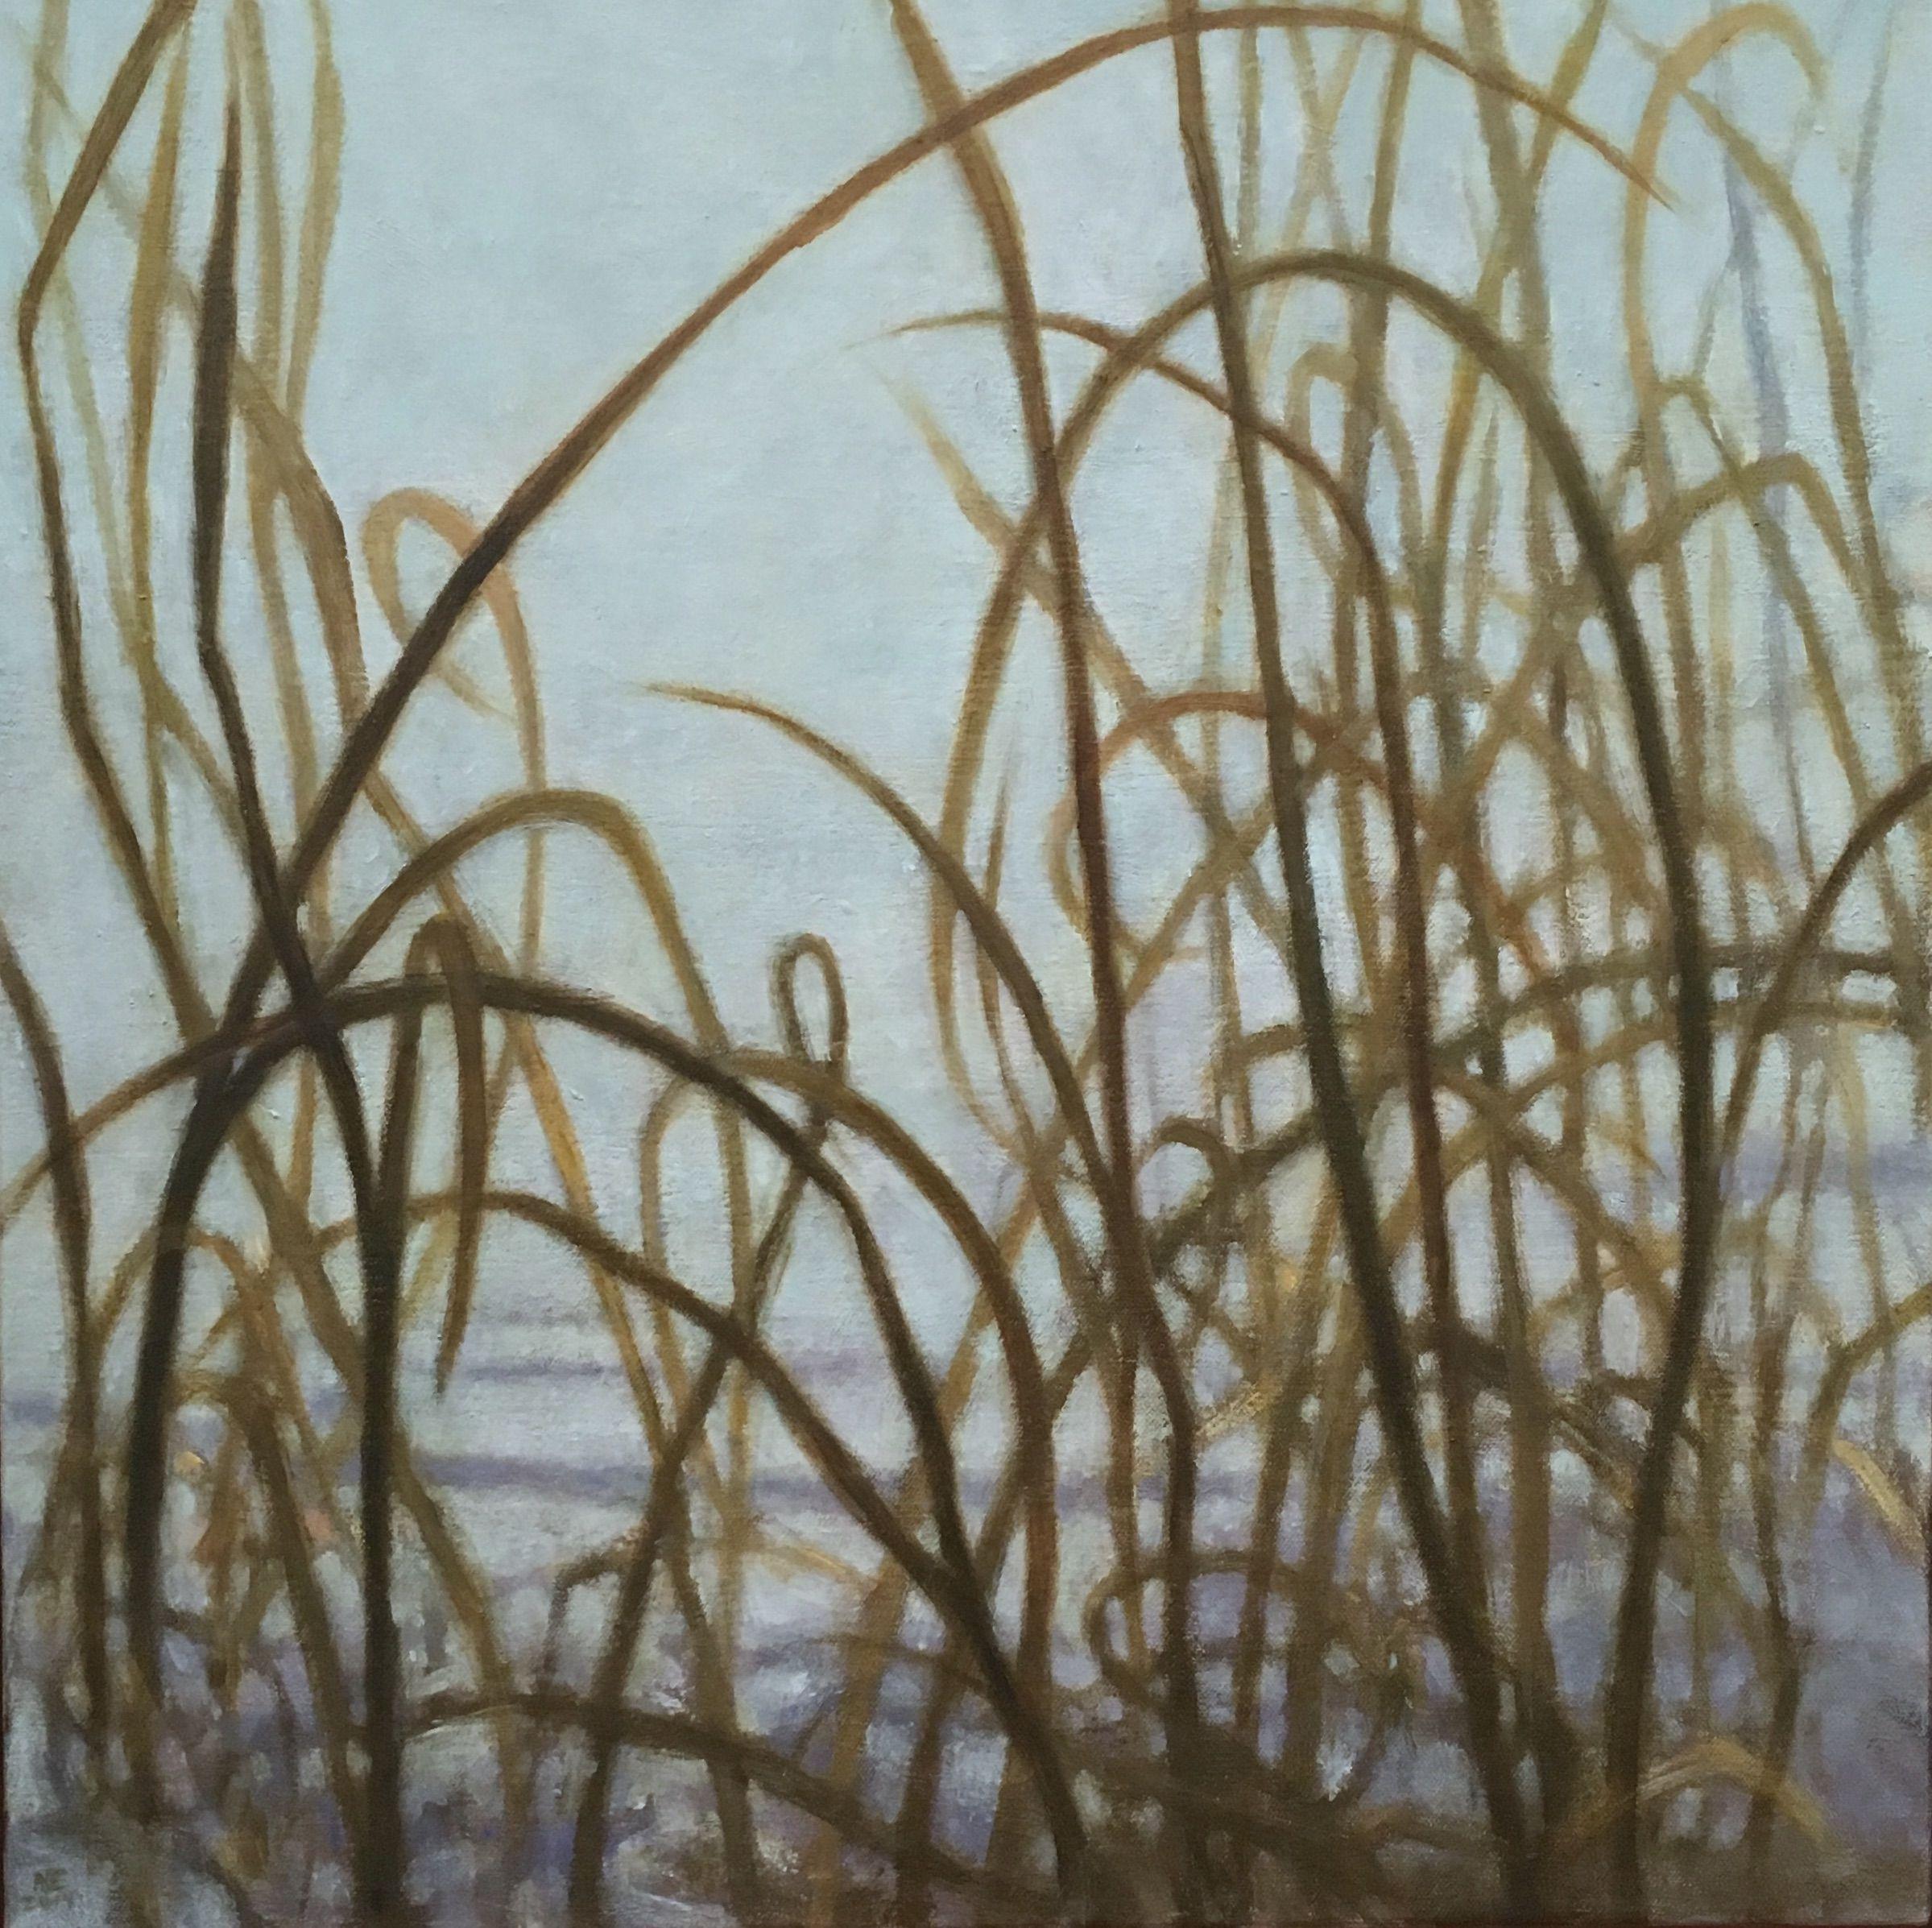 a third version of a snowy field edged in dried grass... or it could suggest a pond beyond.  I like not being too explicit and letting the viewer see their own personal landscape.  This painting continues over the edges so a frame is not required.